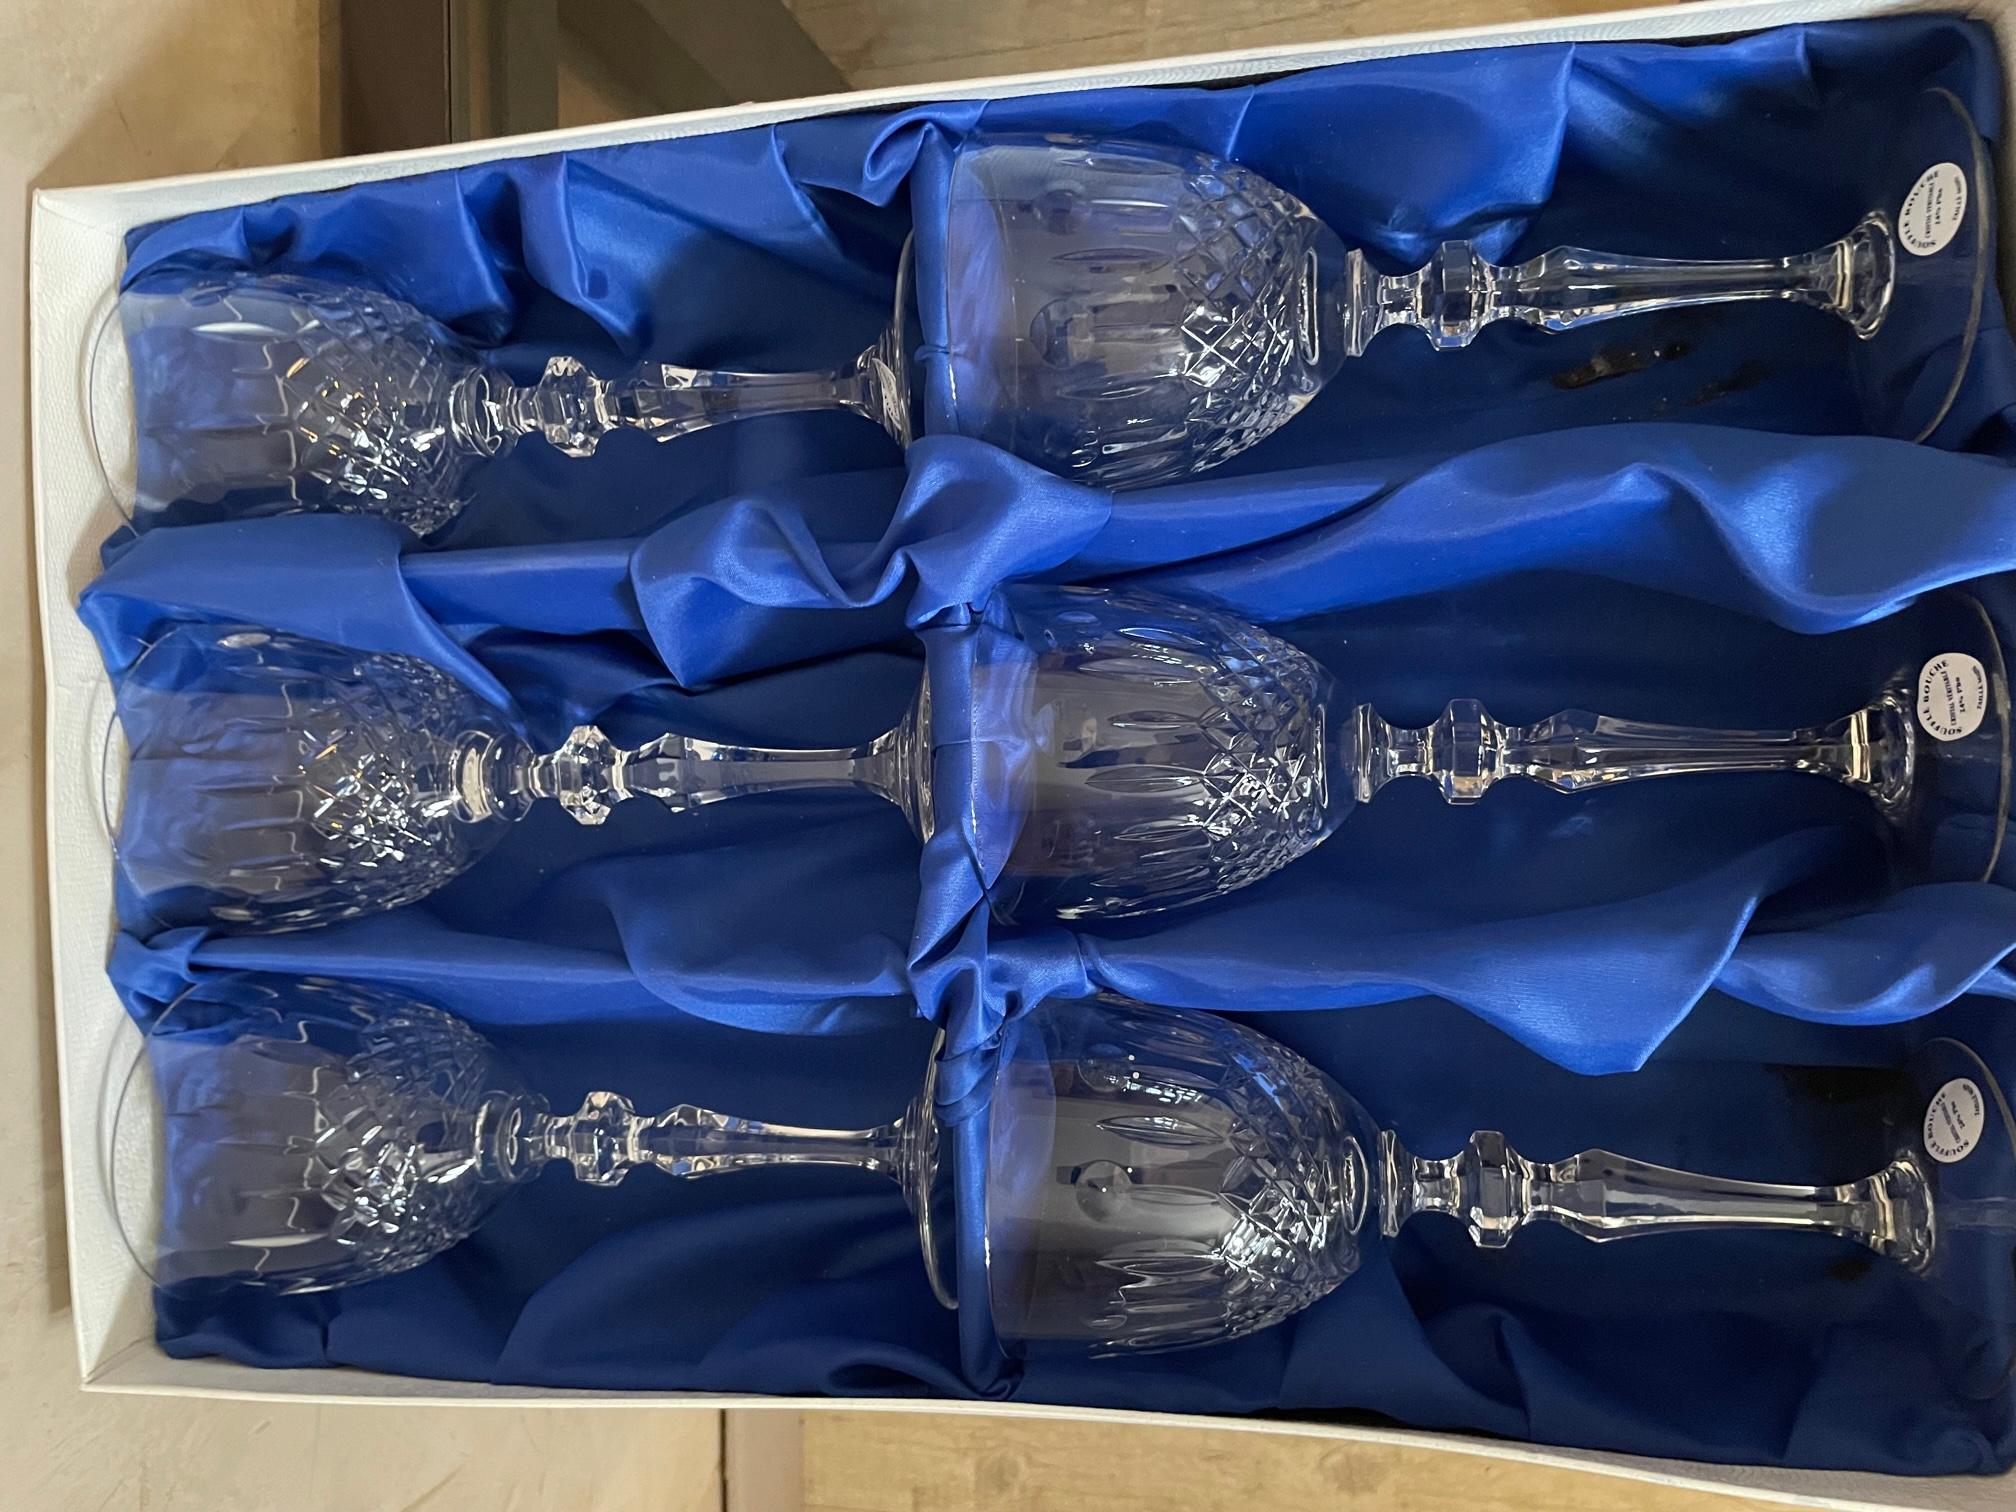 Very beautiful set of glasses and decanter in Lorraine crystal dating from the 1950s, consisting of:
- 6 wine glasses
- 6 water glasses
- 6 flutes
- 1 carafe
Original box for each glass set as well as for the decanter.
Mouth blown and hand cut